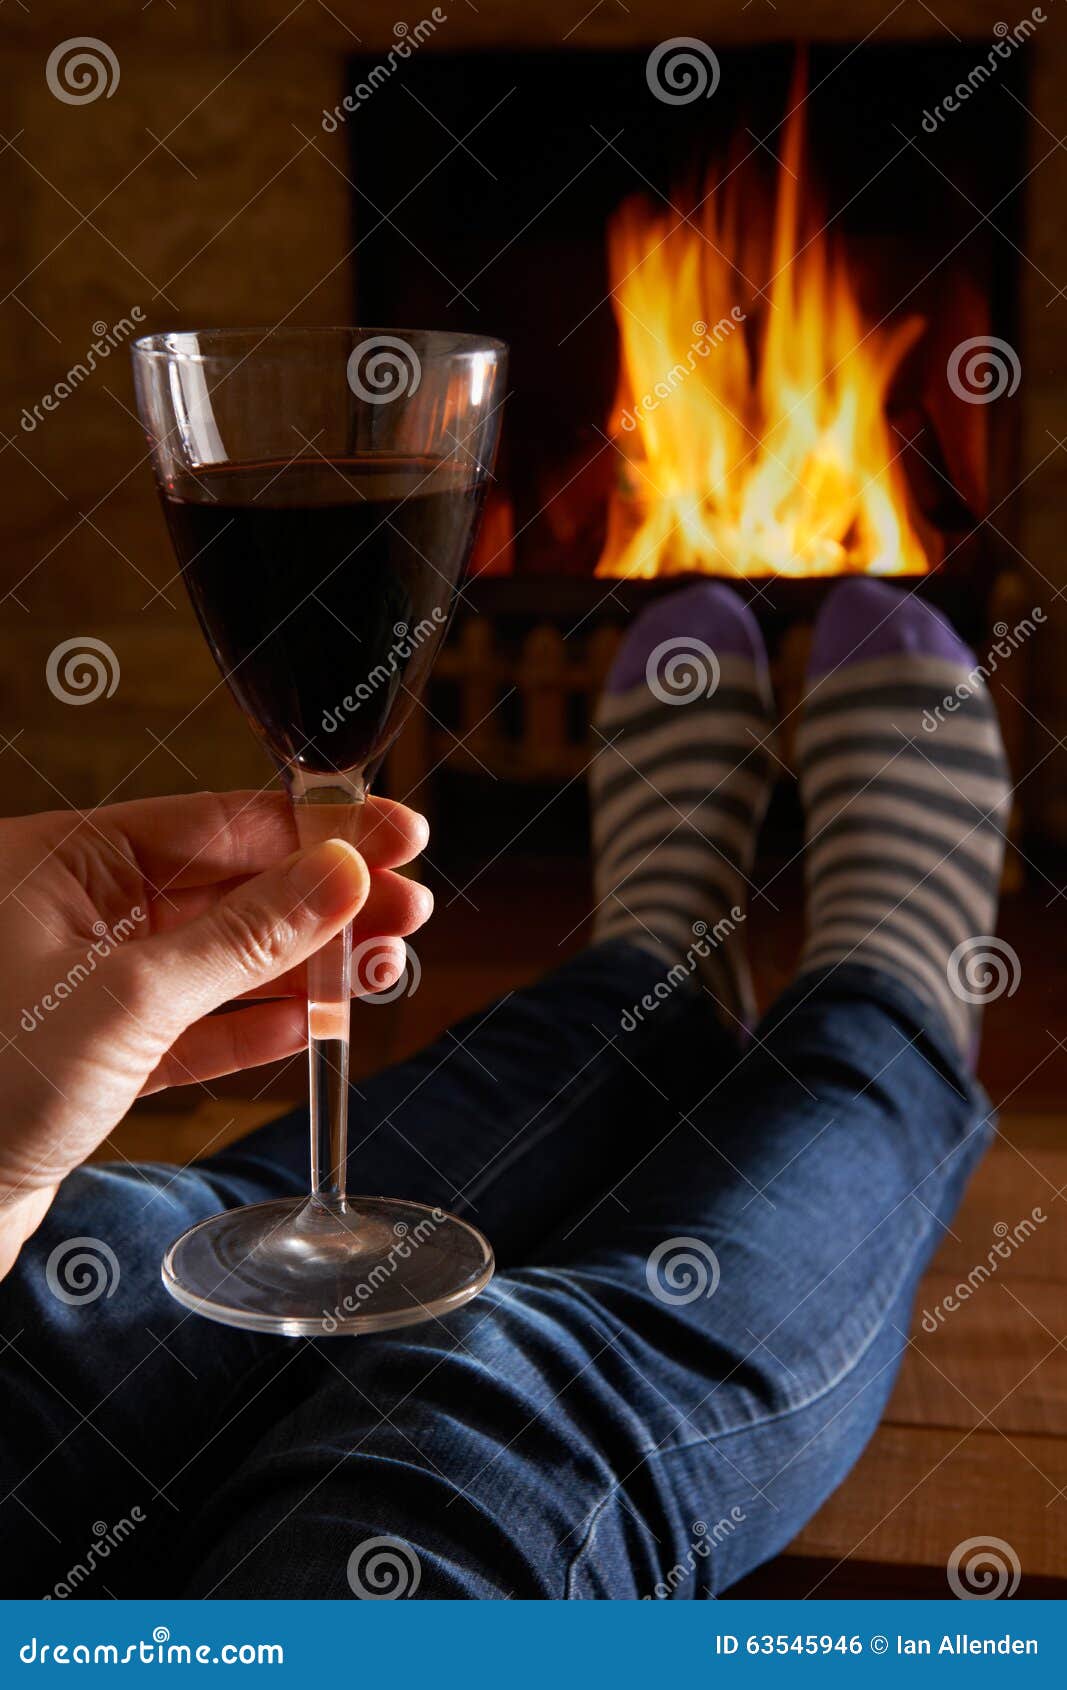 Woman with Glass of Red Wine Relaxing by Fire Stock Photo - Image of ...